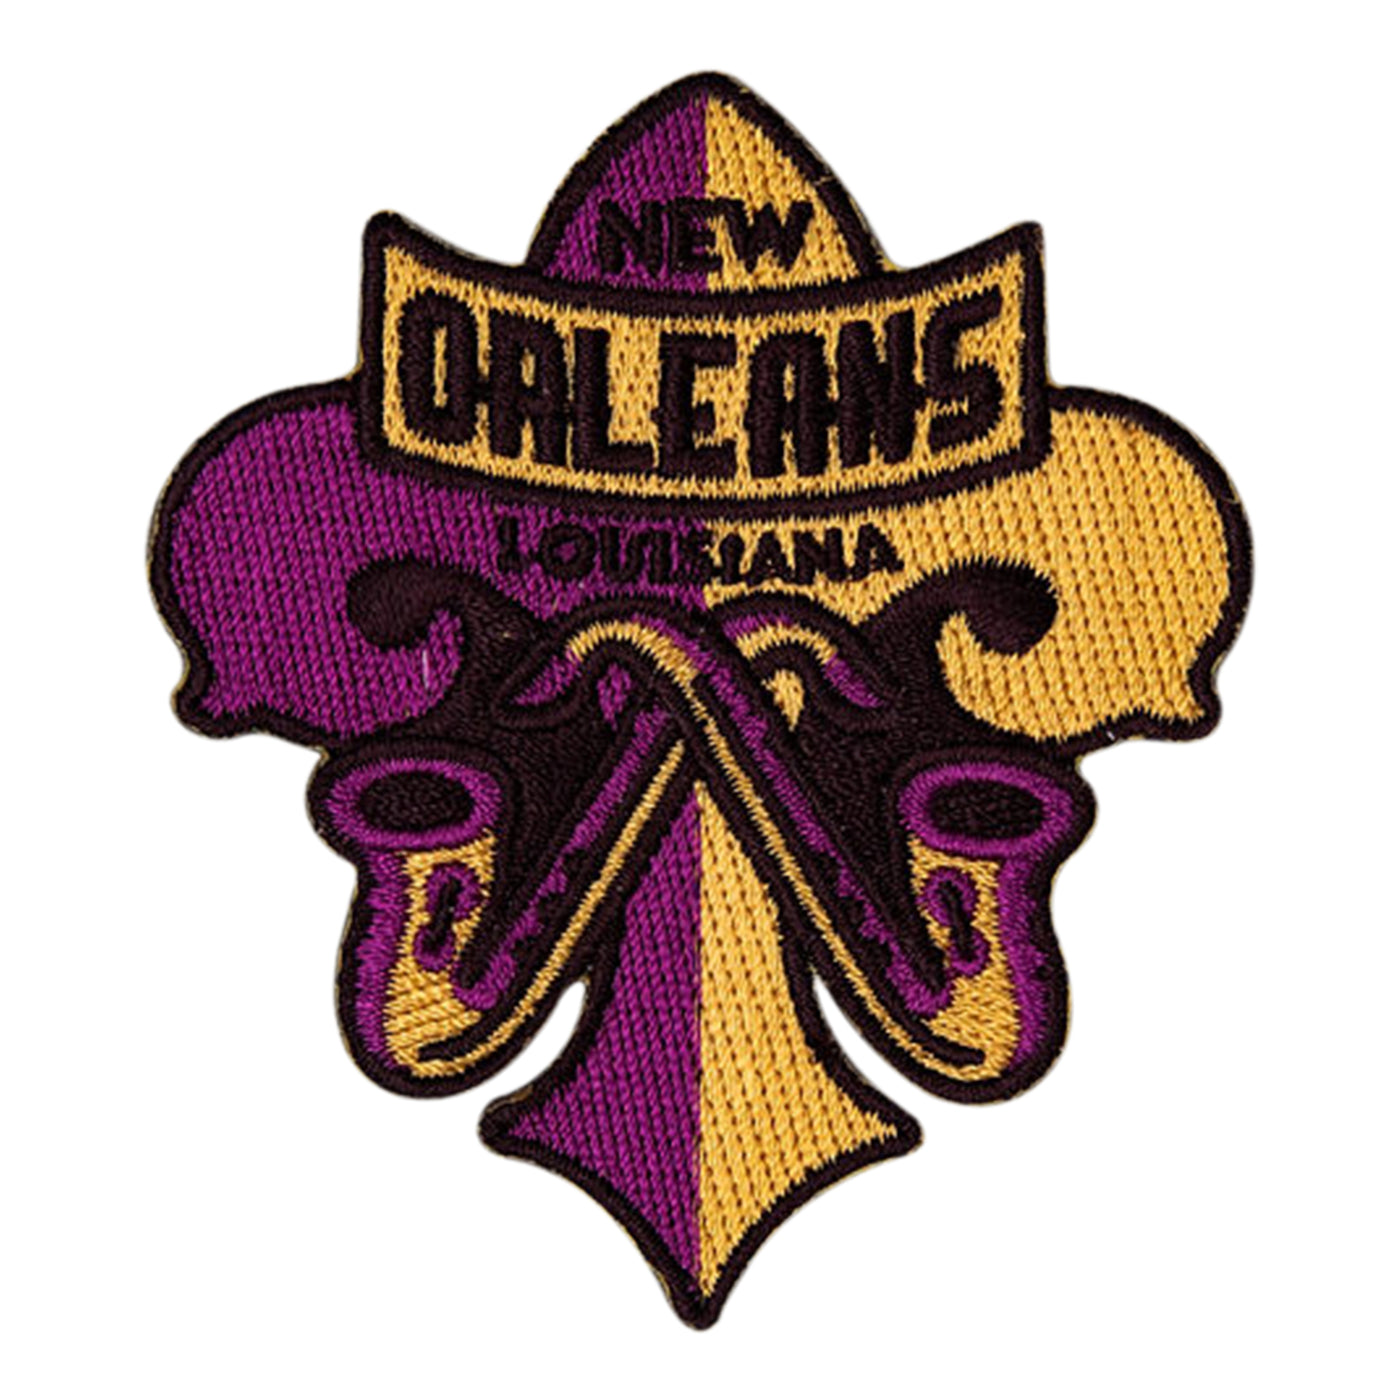 New Orleans Hook Patch